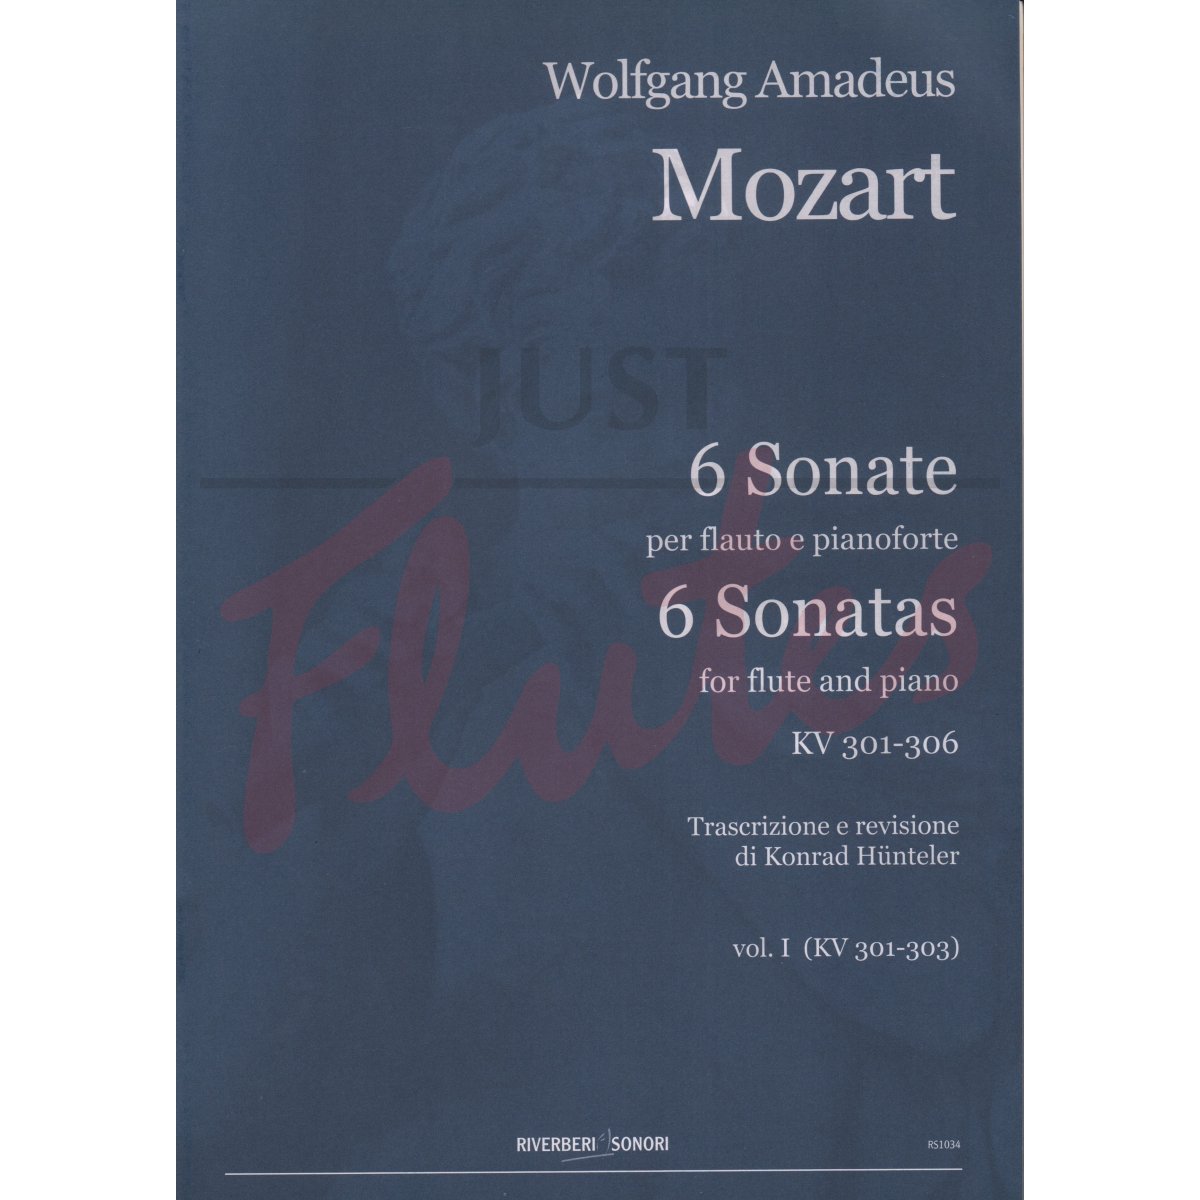 Six Sonatas for Flute and Piano, Vol. 1